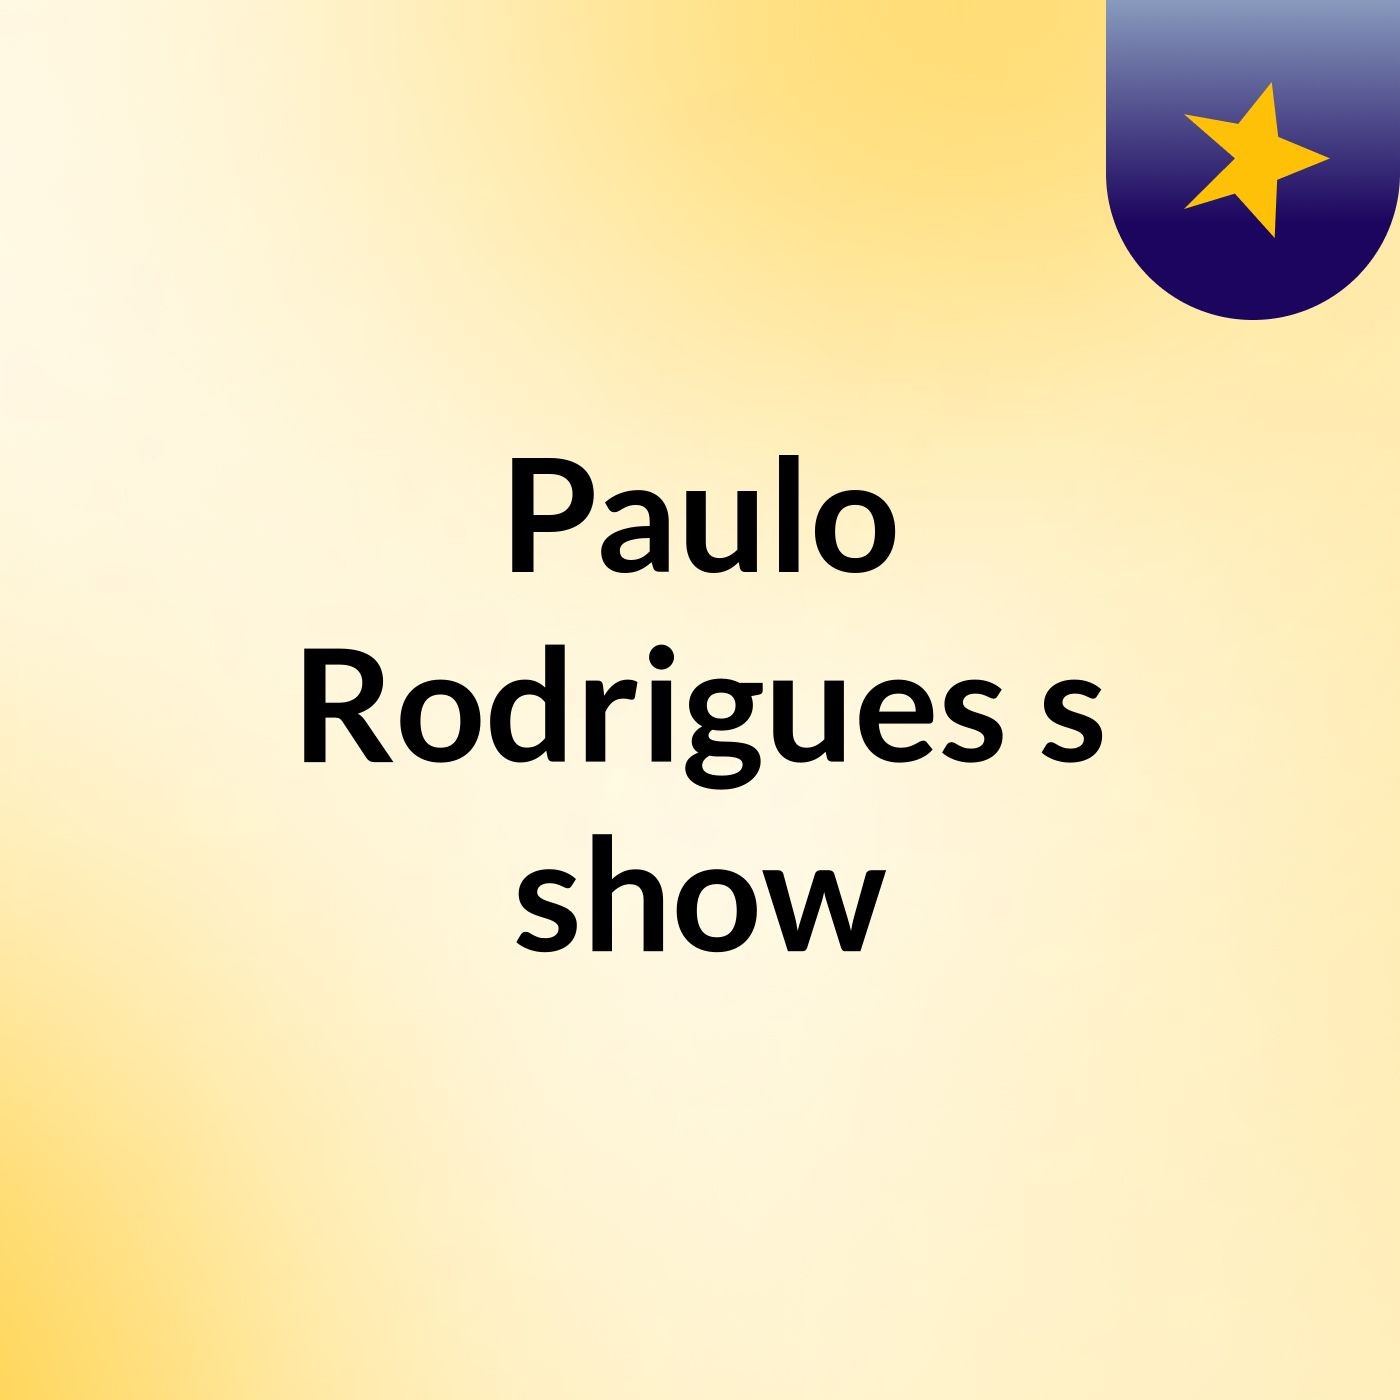 Paulo Rodrigues's show